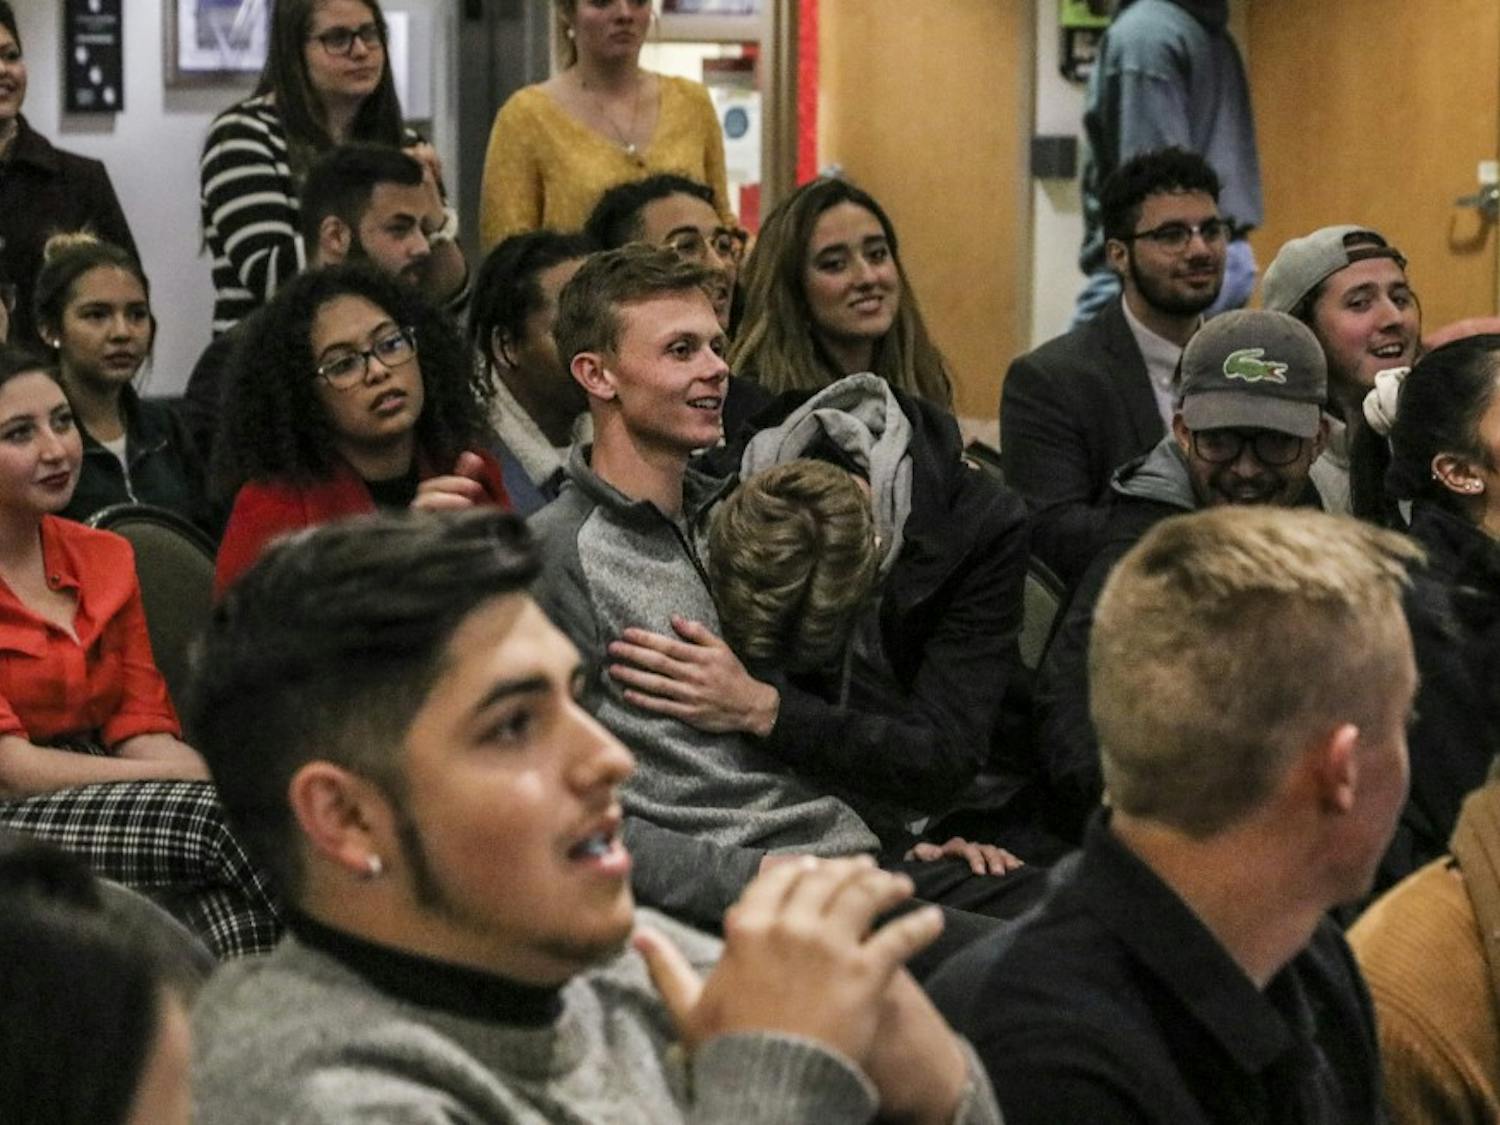 Daniel Stearns embraces Elijah Jaffe as their names are announced during the ASUNM Senate Election results meeting in the SUB on the evening of Nov. 14.